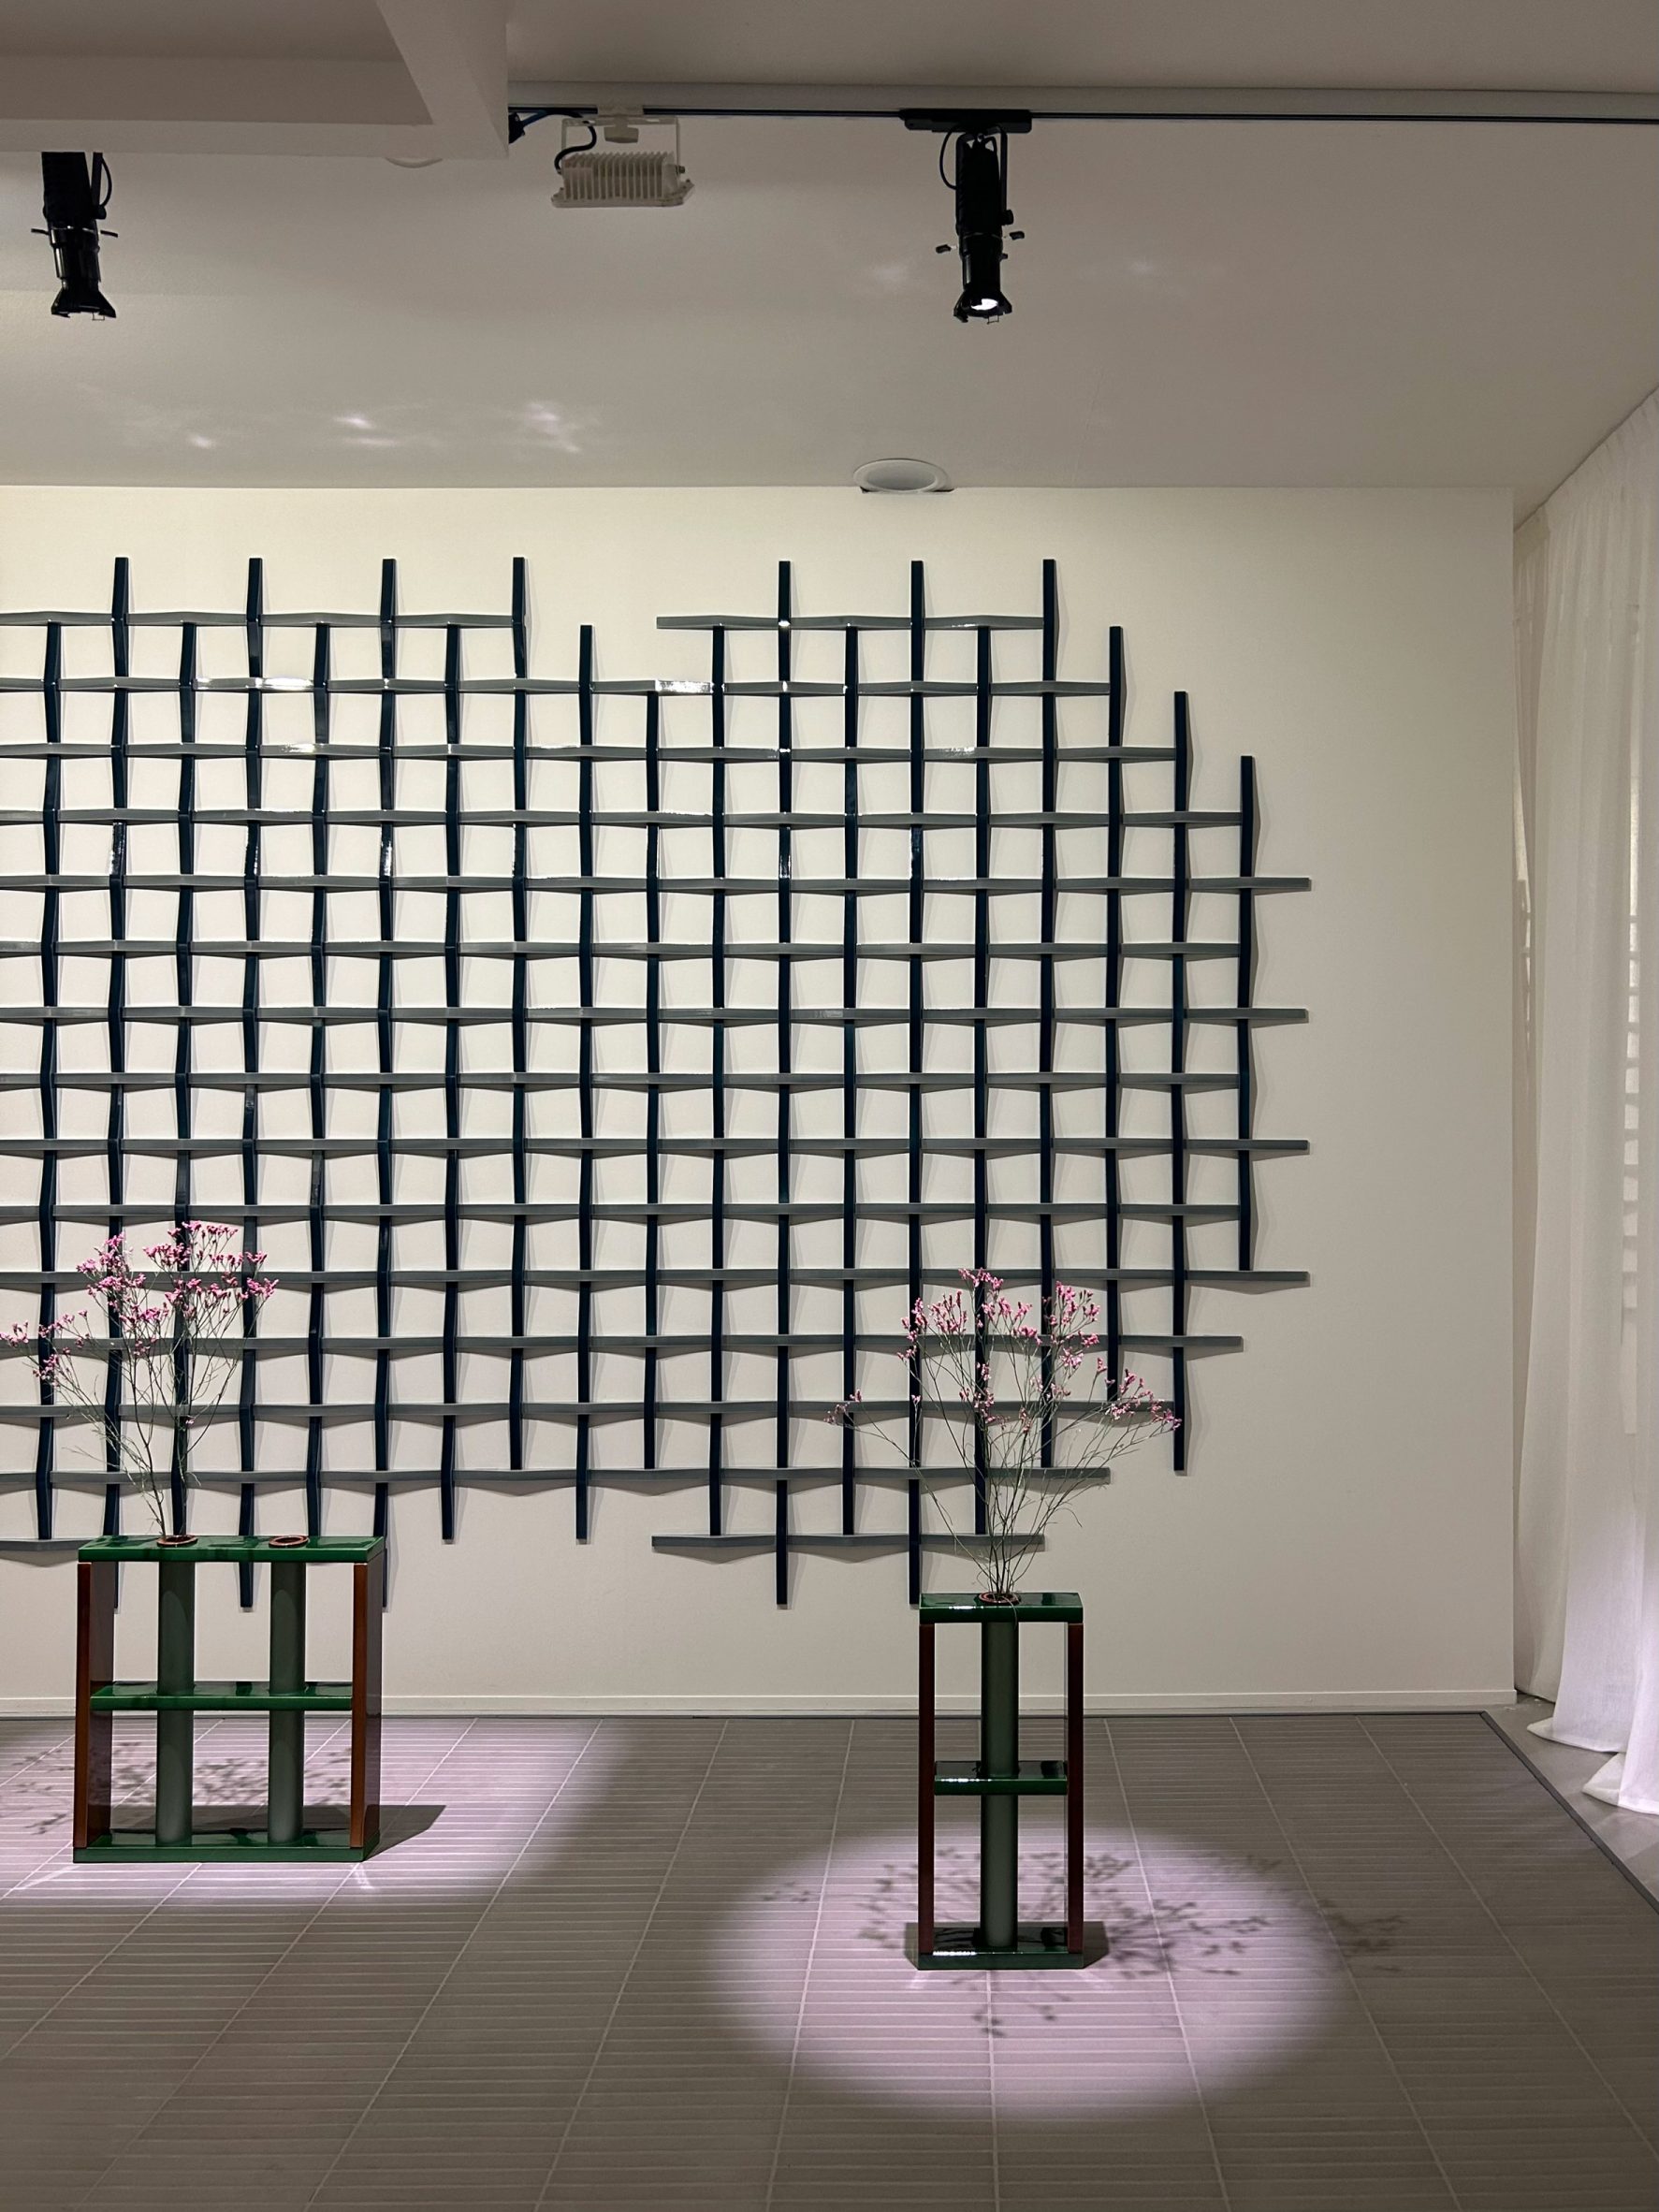 The designer has developed a modular system that can also be used to create larger wall pieces.